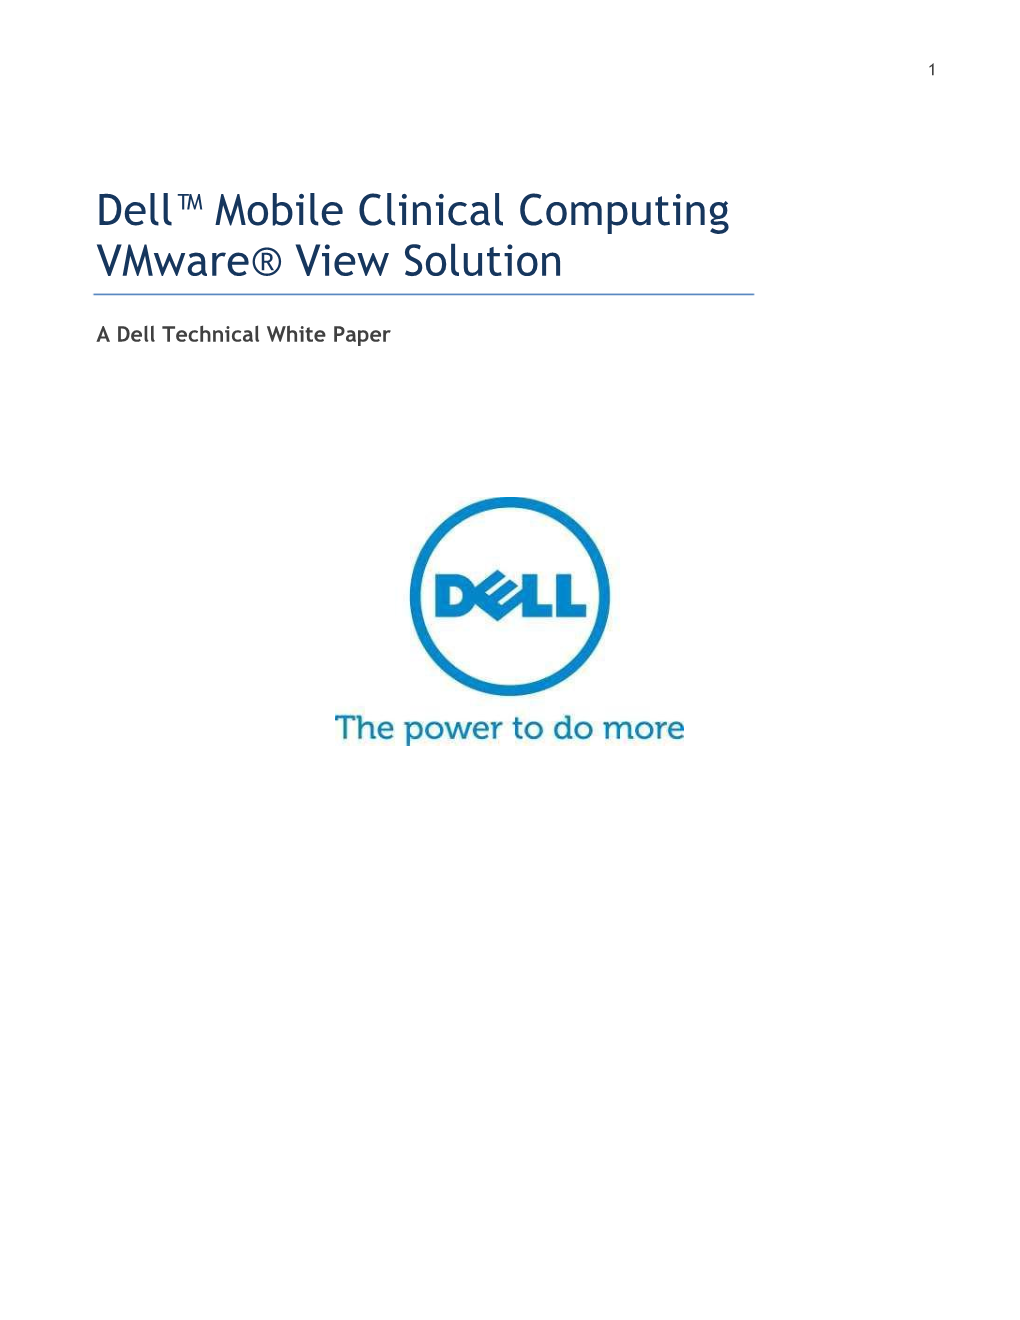 Dell™ Mobile Clinical Computing Vmware® View Solution